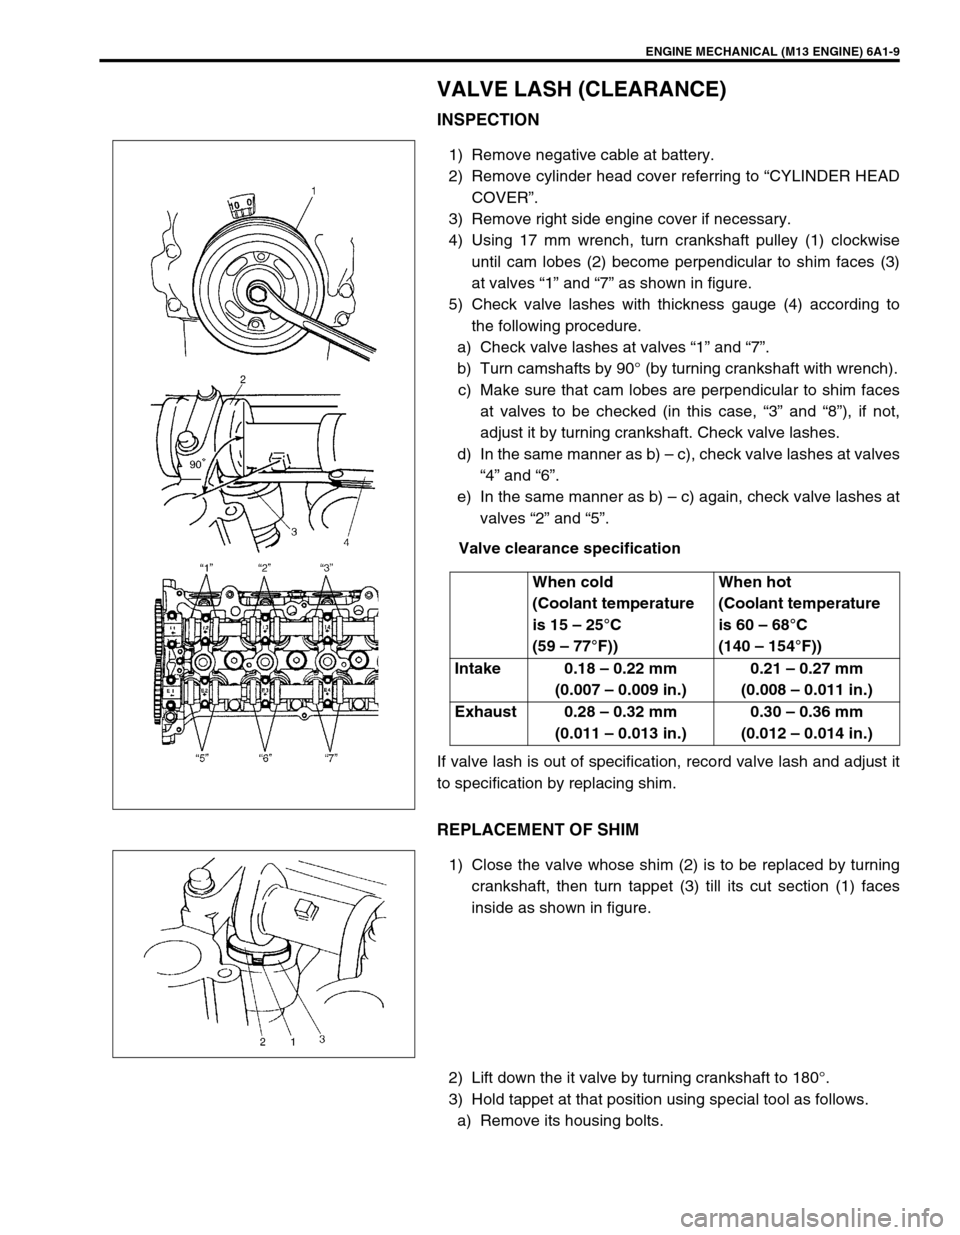 SUZUKI SWIFT 2000 1.G RG413 Service Workshop Manual ENGINE MECHANICAL (M13 ENGINE) 6A1-9
VALVE LASH (CLEARANCE)
INSPECTION
1) Remove negative cable at battery.
2) Remove cylinder head cover referring to “CYLINDER HEAD
COVER”.
3) Remove right side e